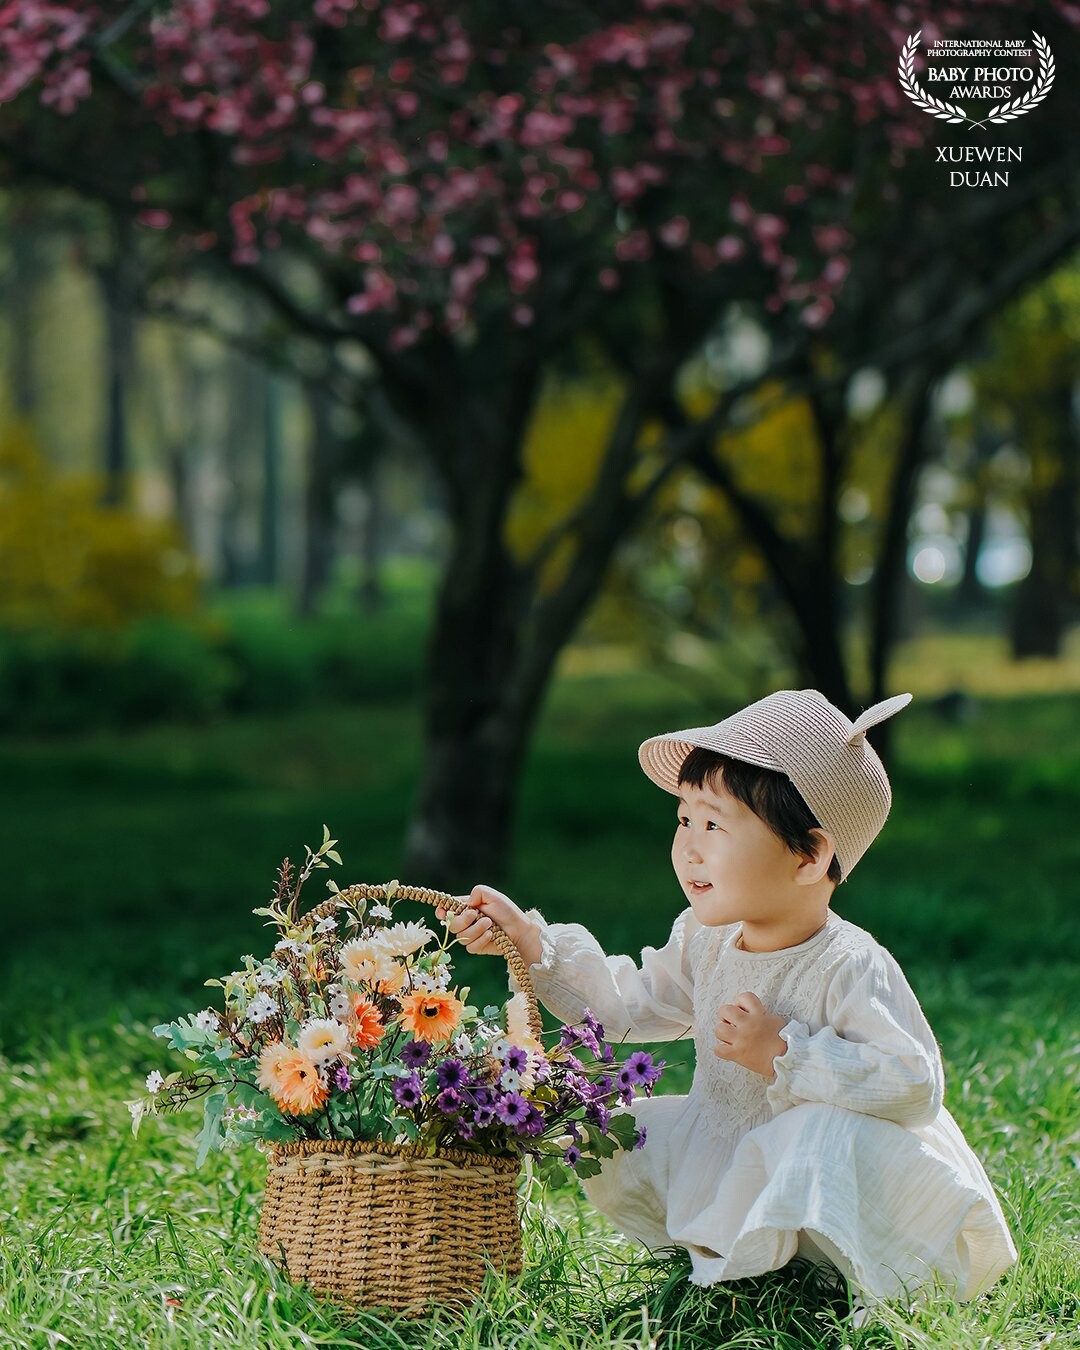 The day we took pictures of Miya, it was the season of travel. There were many people on the lawn. The morning sun came down and passed through the treetops. Miya held a beautiful flower basket and looked up and smiled. It was very beautiful.